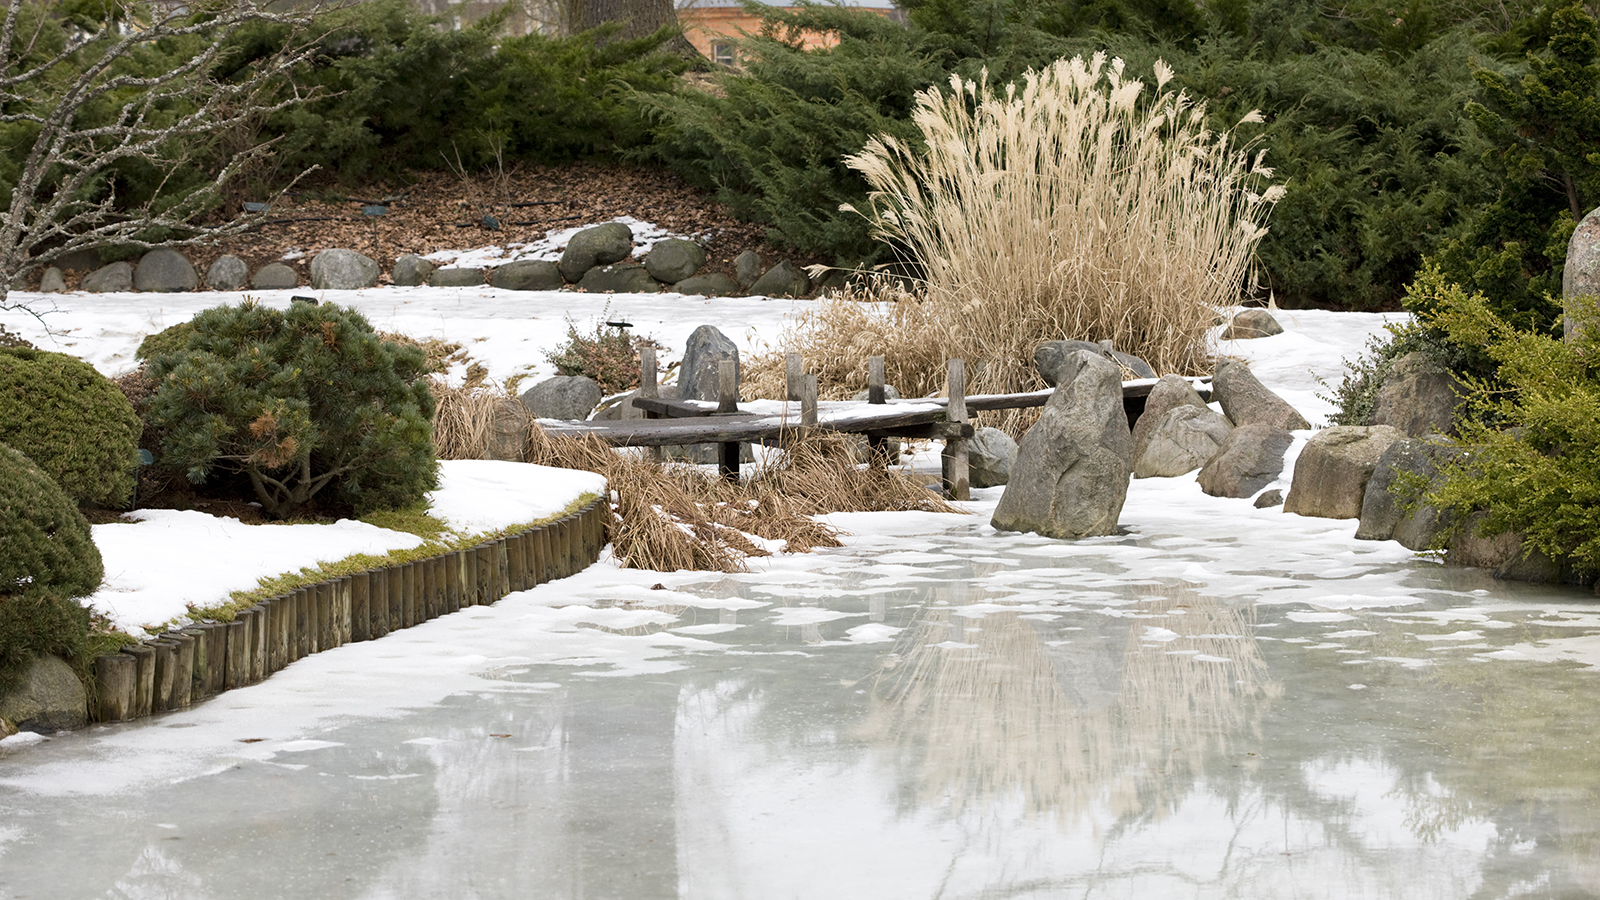 How to heat a pond in winter: 5 ideas to prevent it freezing